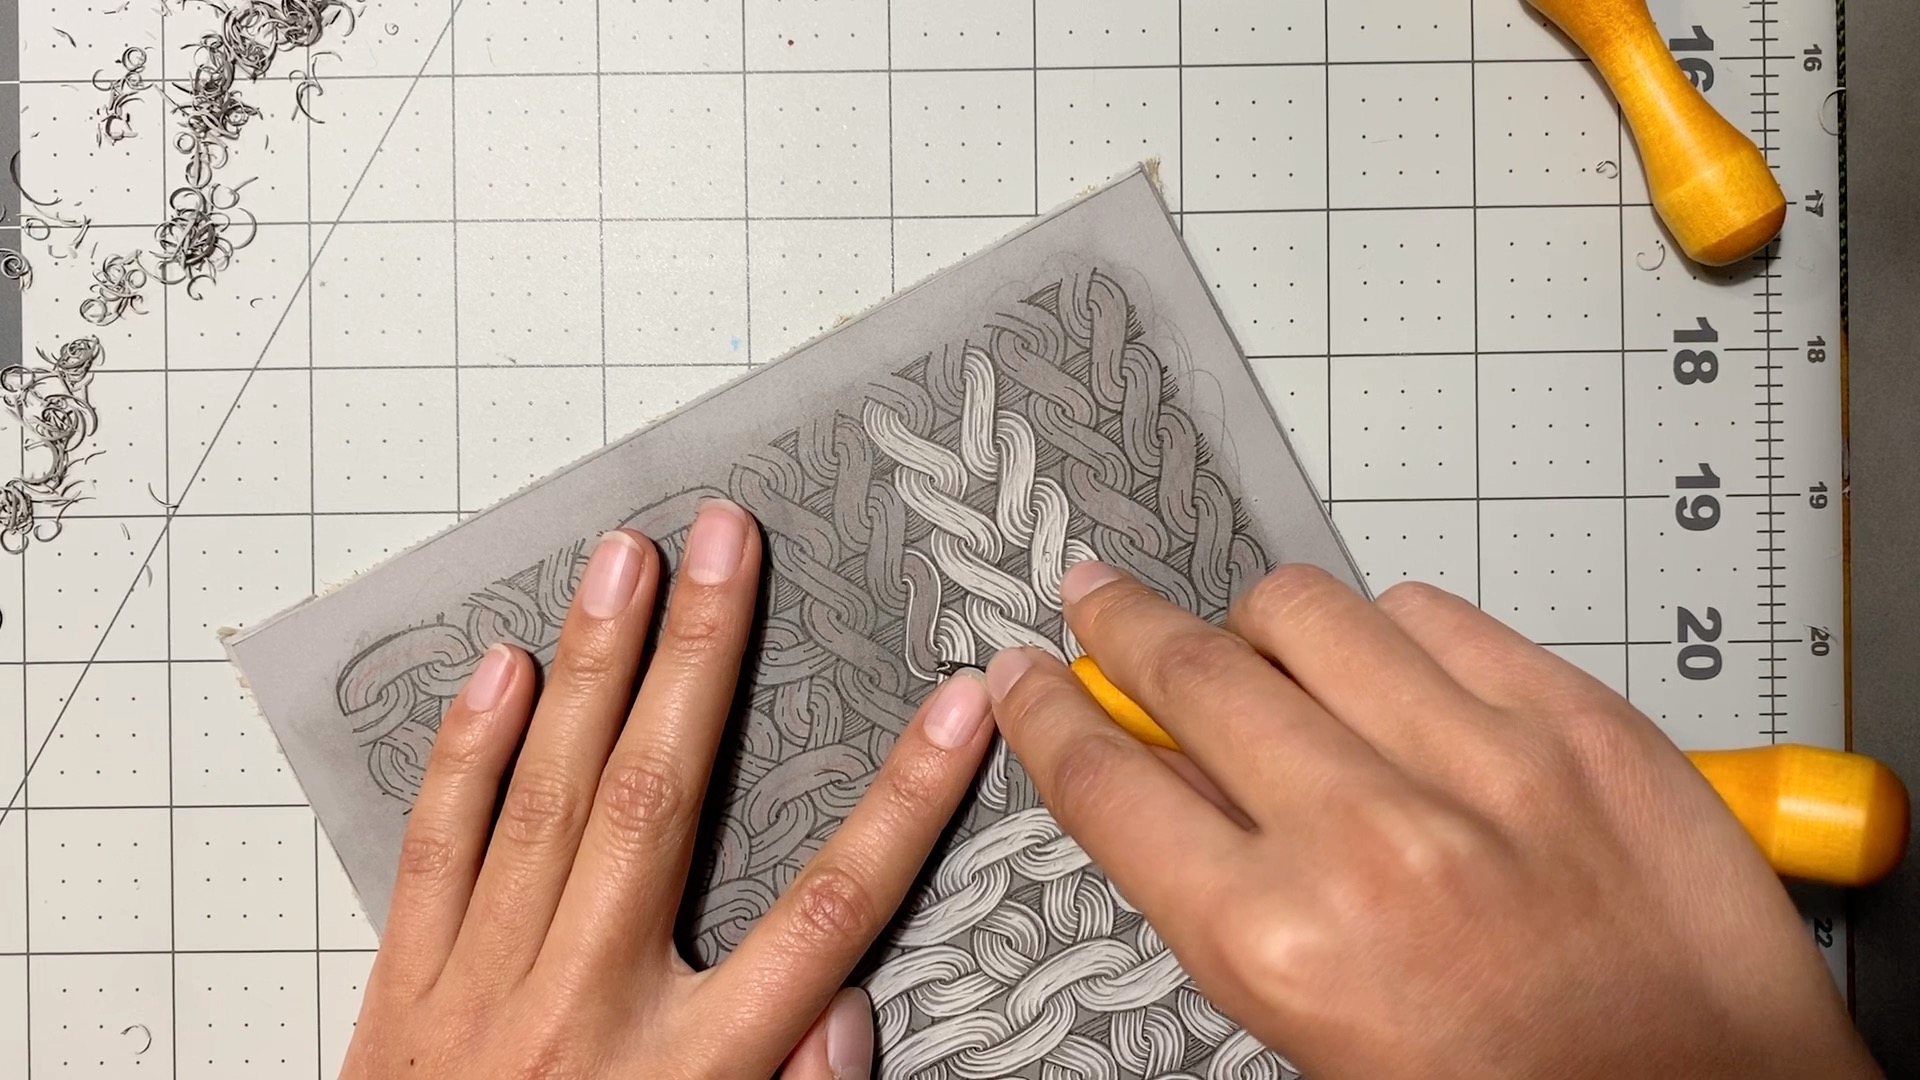 2 hands positioned on top of a grey piece of linoleum. The right hand holds a yellow carving tool and is removing material from the surface of the linoleum.